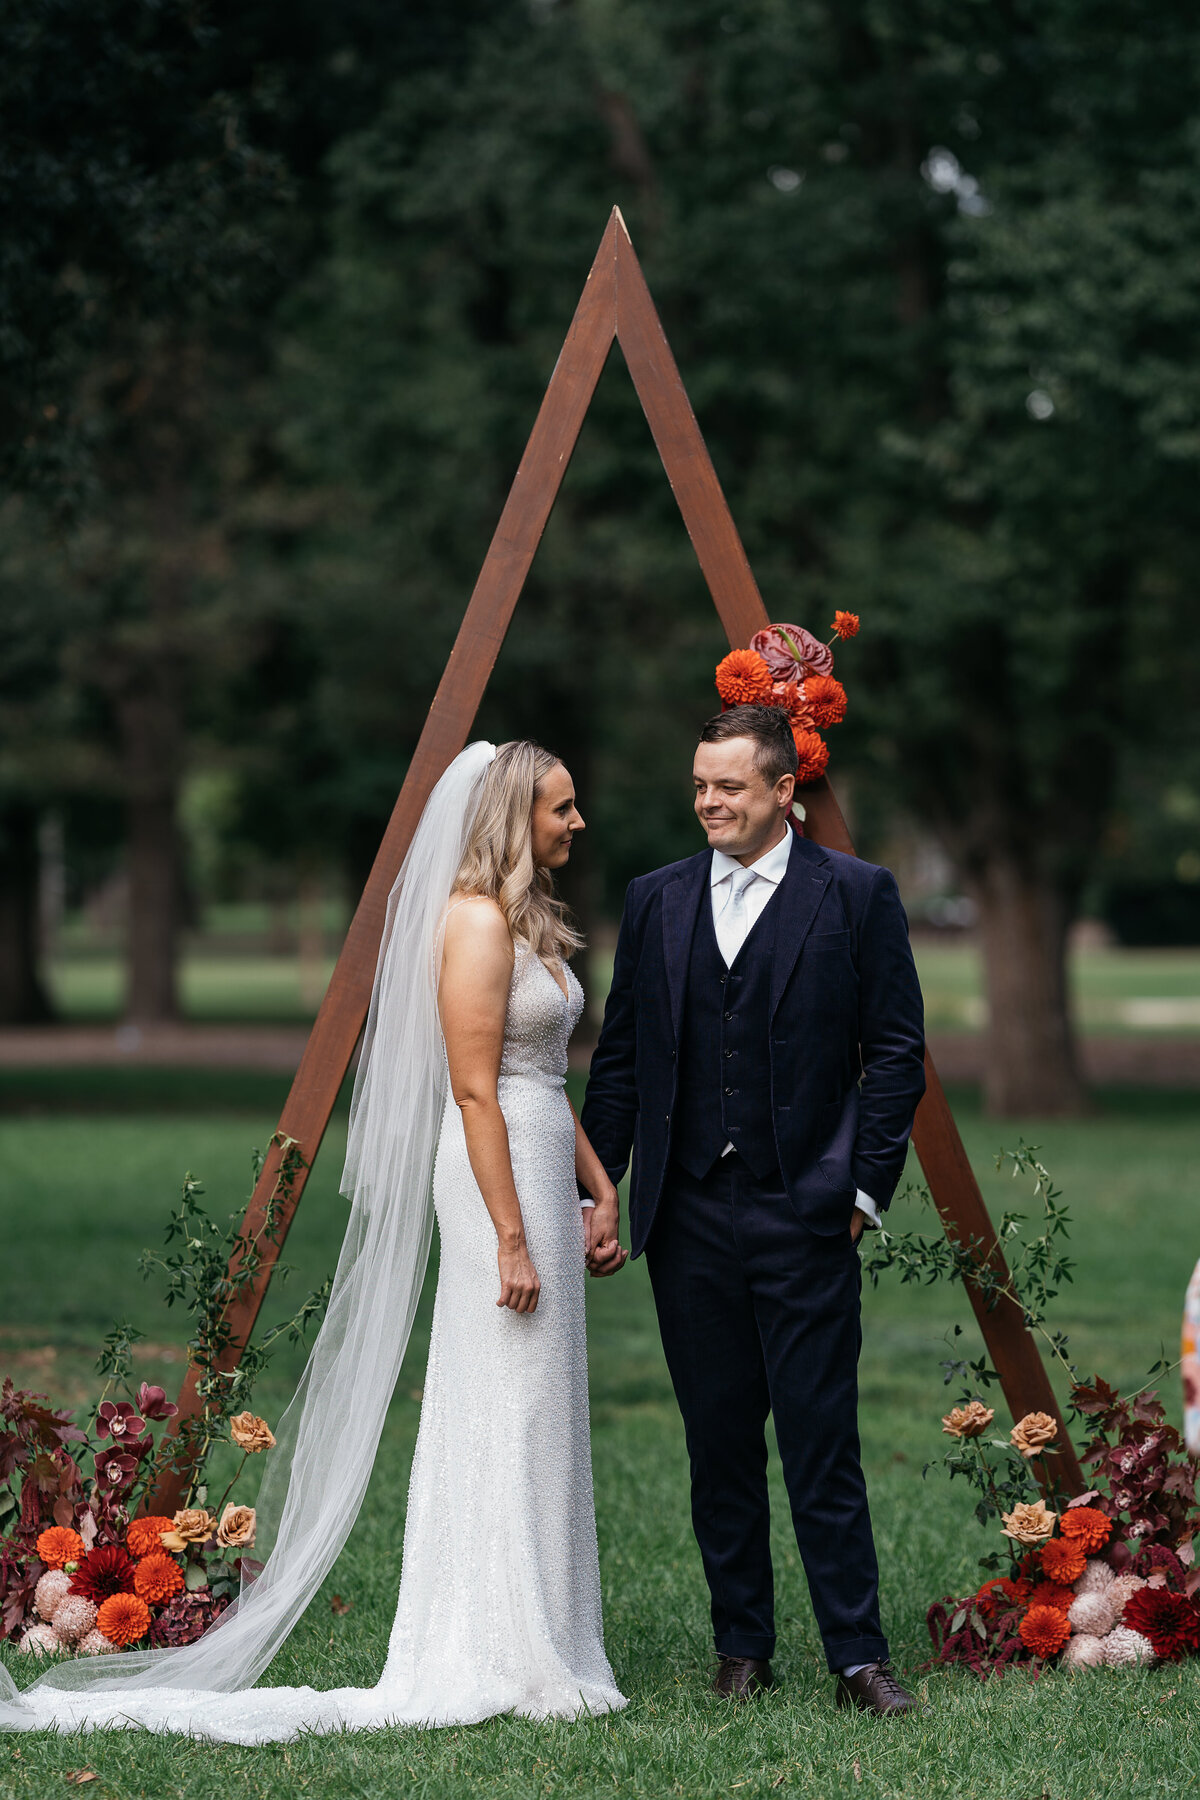 Courtney Laura Photography, Melbourne Wedding Photographer, Fitzroy Nth, 75 Reid St, Cath and Mitch-371